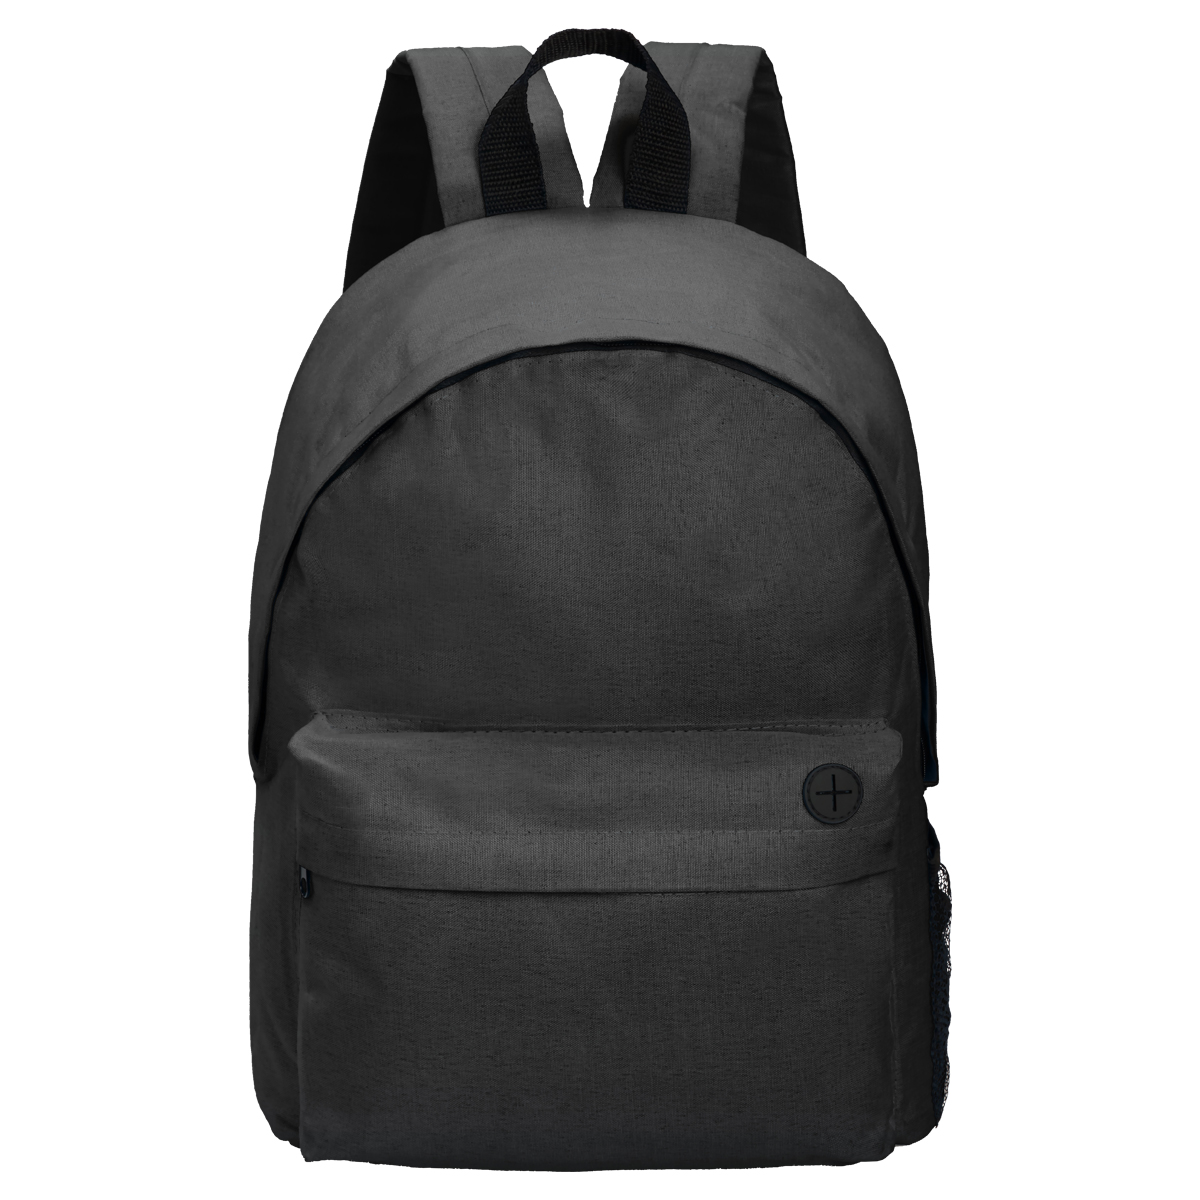 Luffin Backpack Product Image